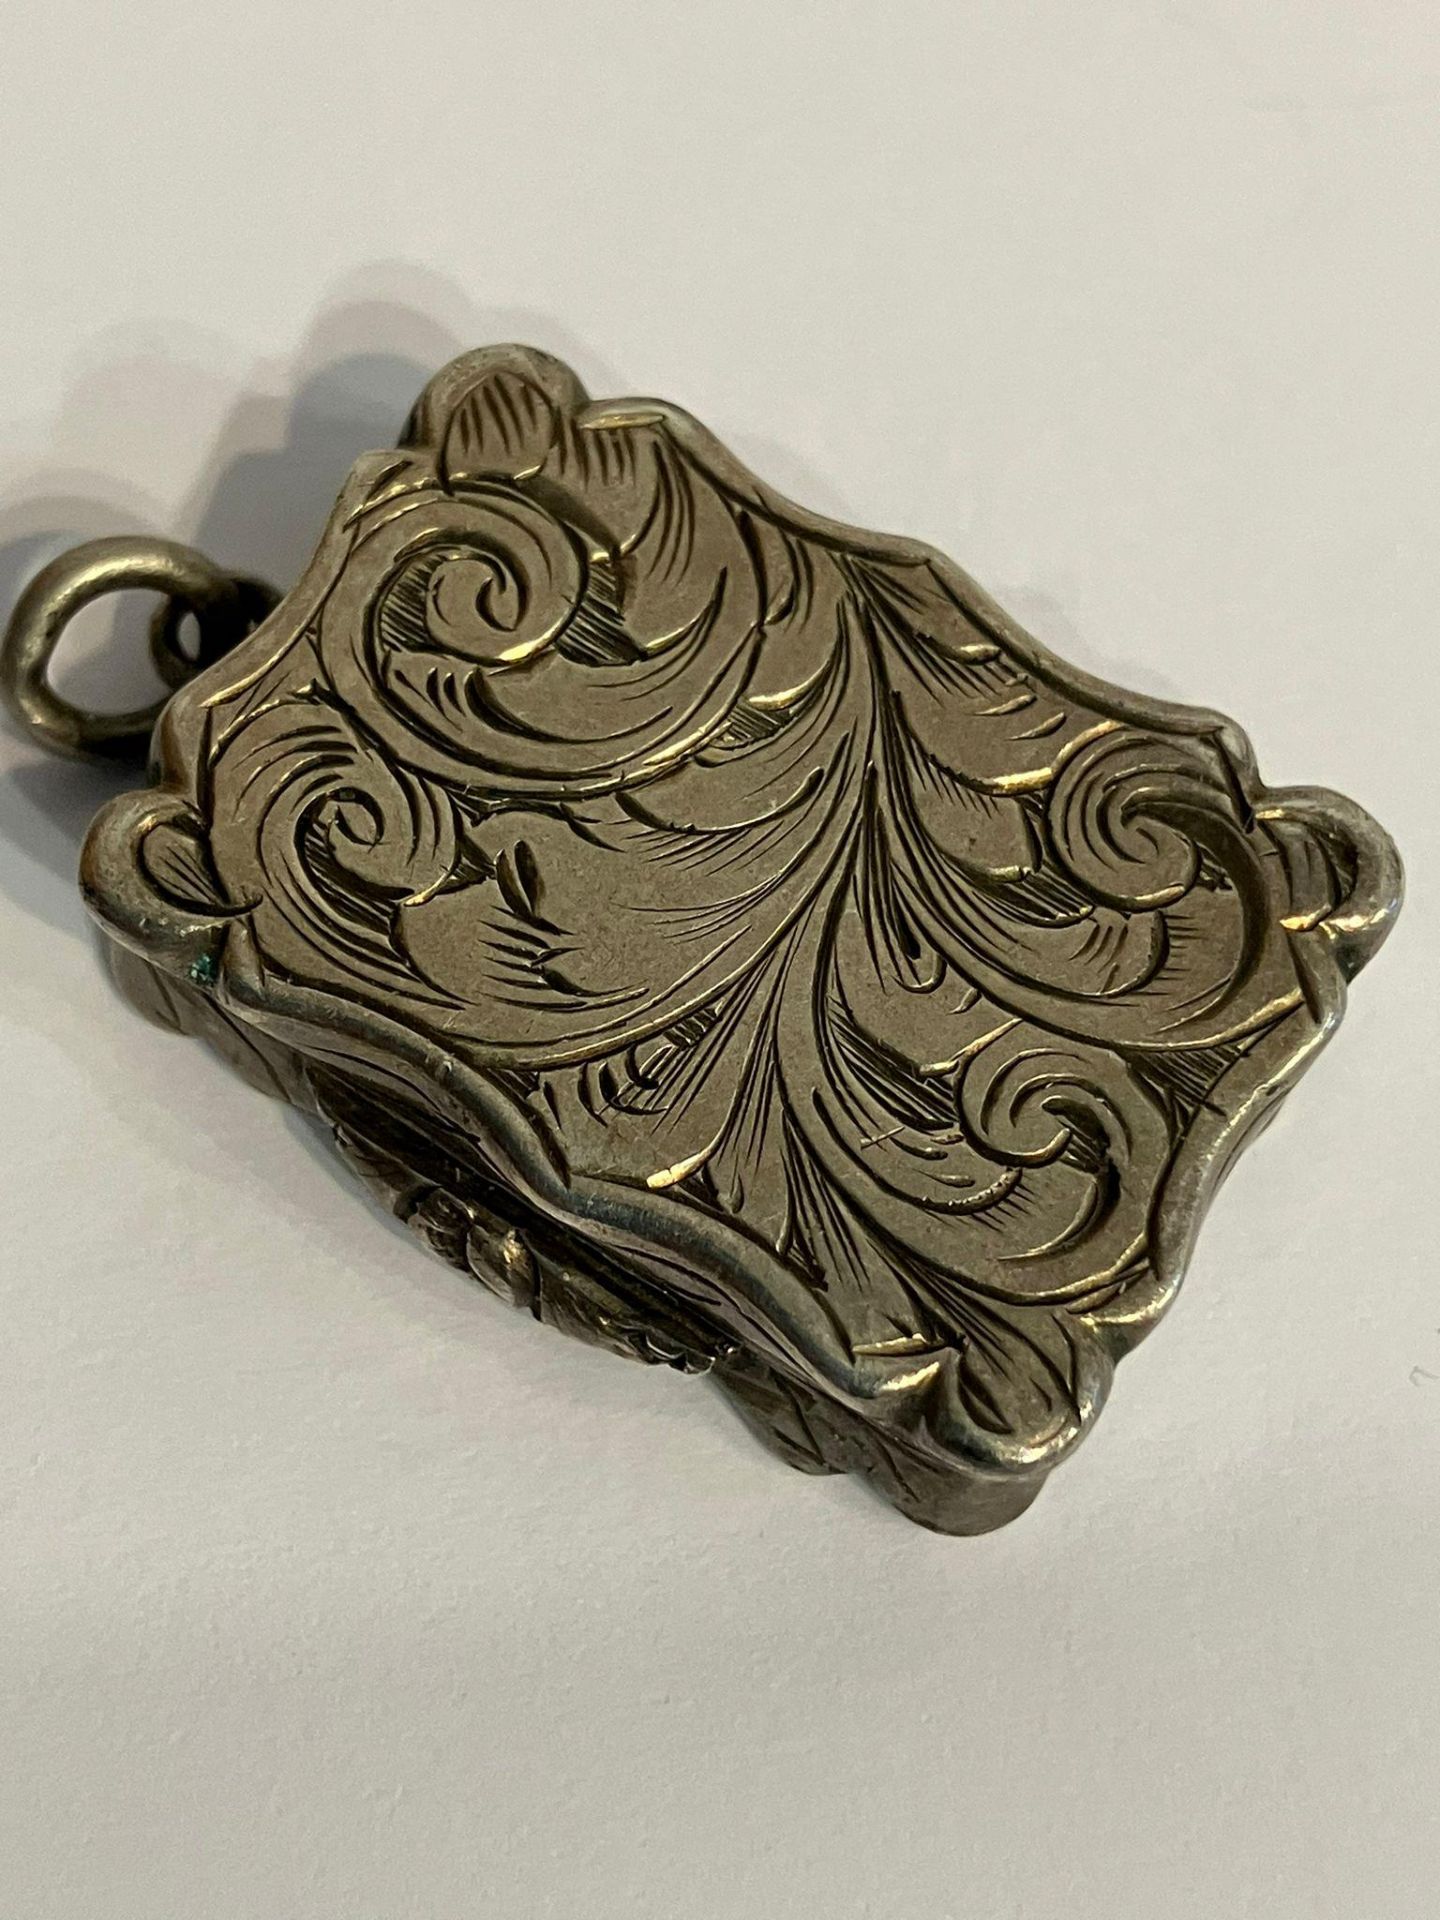 Antique SILVER VINAIGRETTE Having foliate and scroll decoration to lid with gilded interior - Image 2 of 6